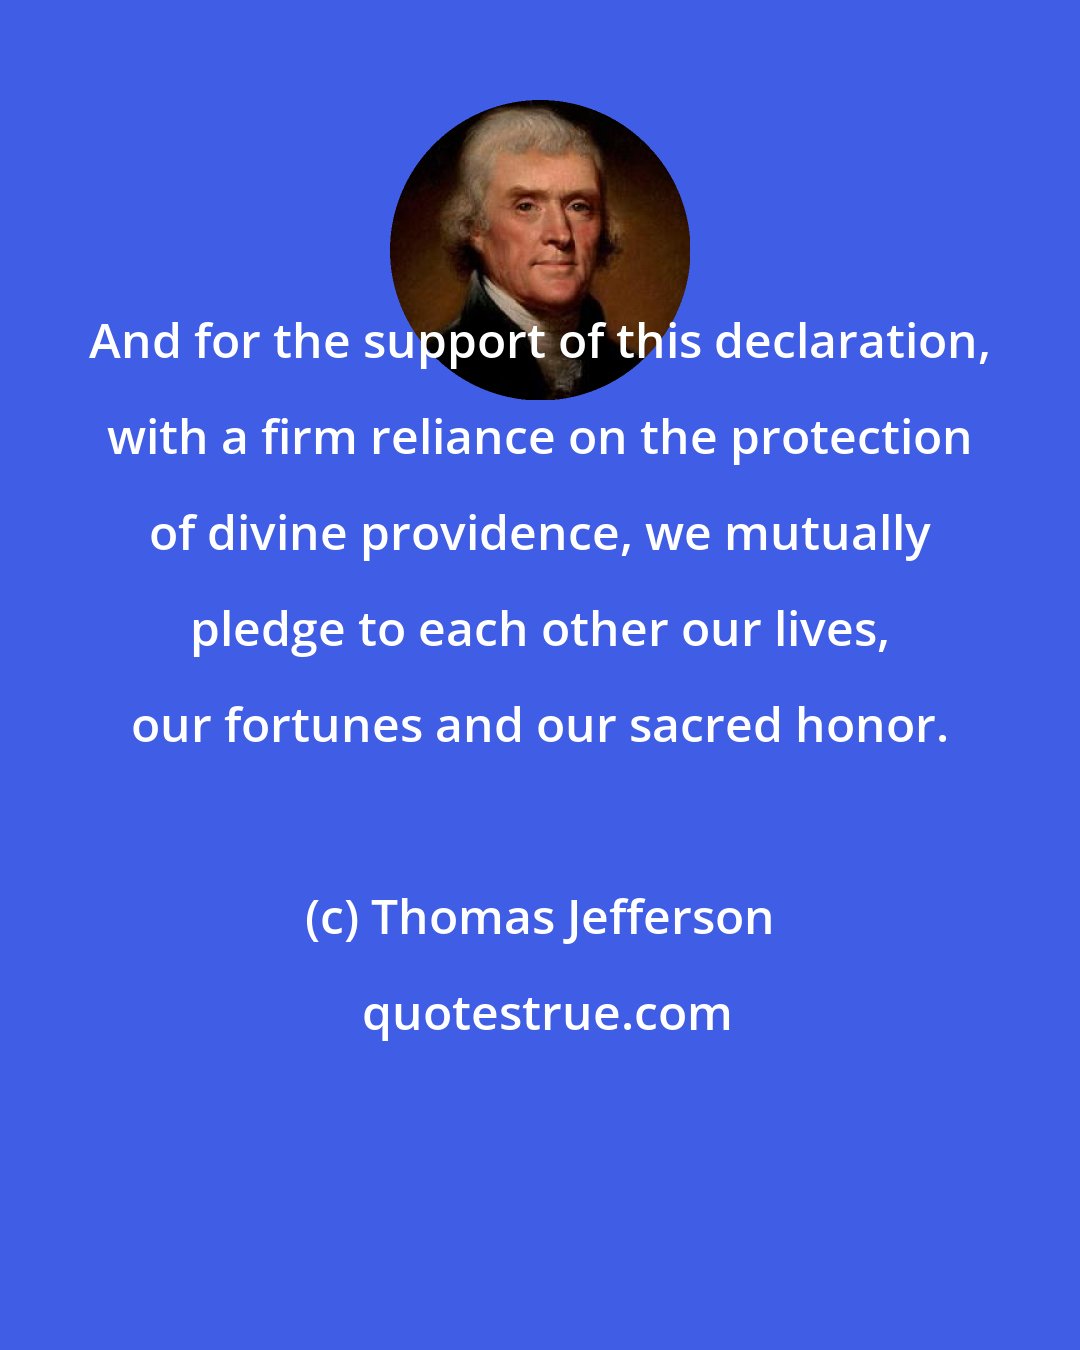 Thomas Jefferson: And for the support of this declaration, with a firm reliance on the protection of divine providence, we mutually pledge to each other our lives, our fortunes and our sacred honor.